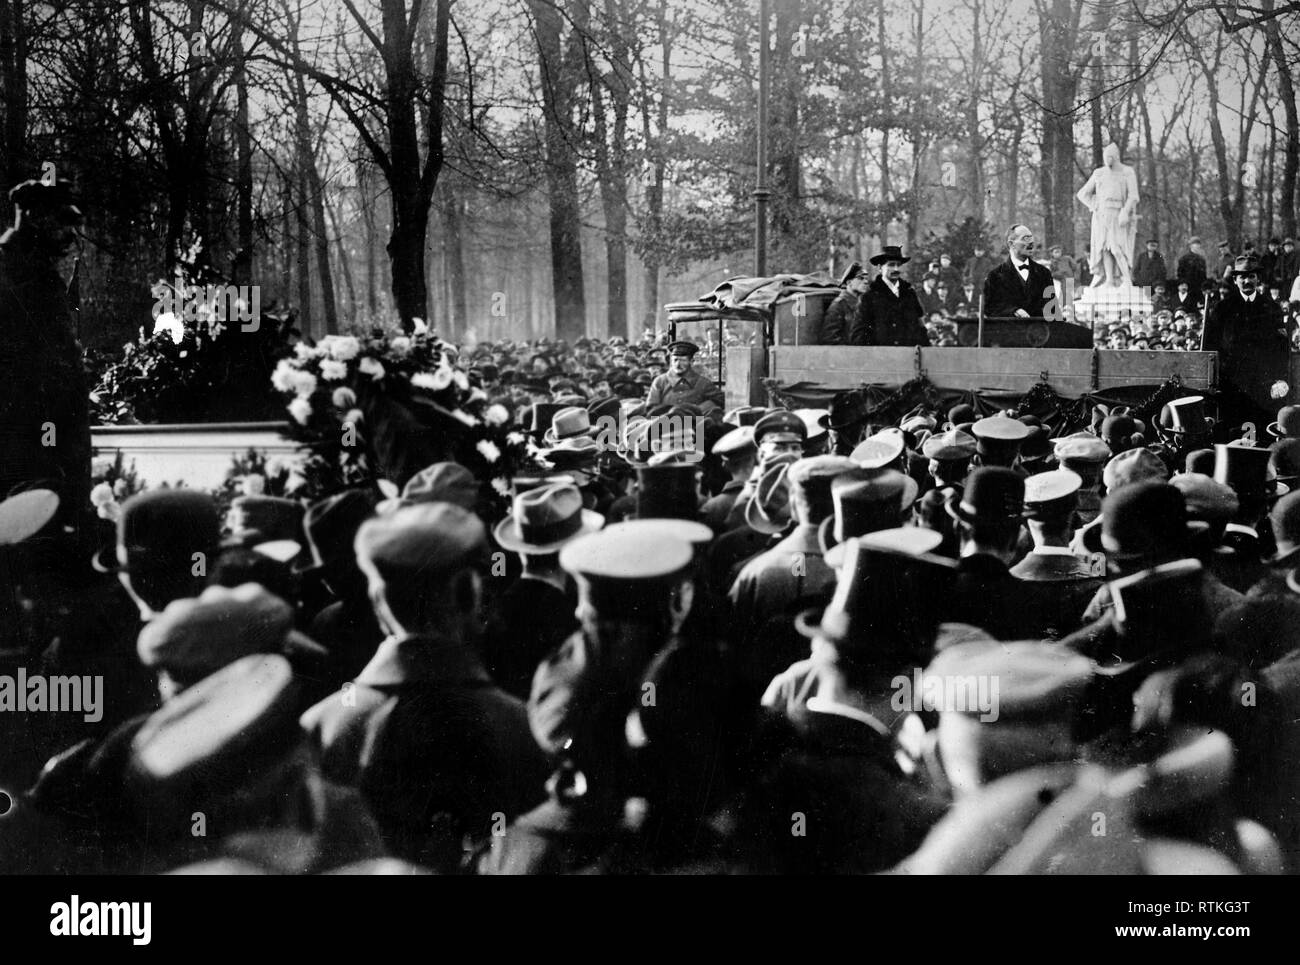 German Revolution - The last public appearance of Liebnecht, on Sieges Allee. After this inciting meeting he was arrested by Ebert Government troops, Berlin, Germany (possibly January 1919) Stock Photo